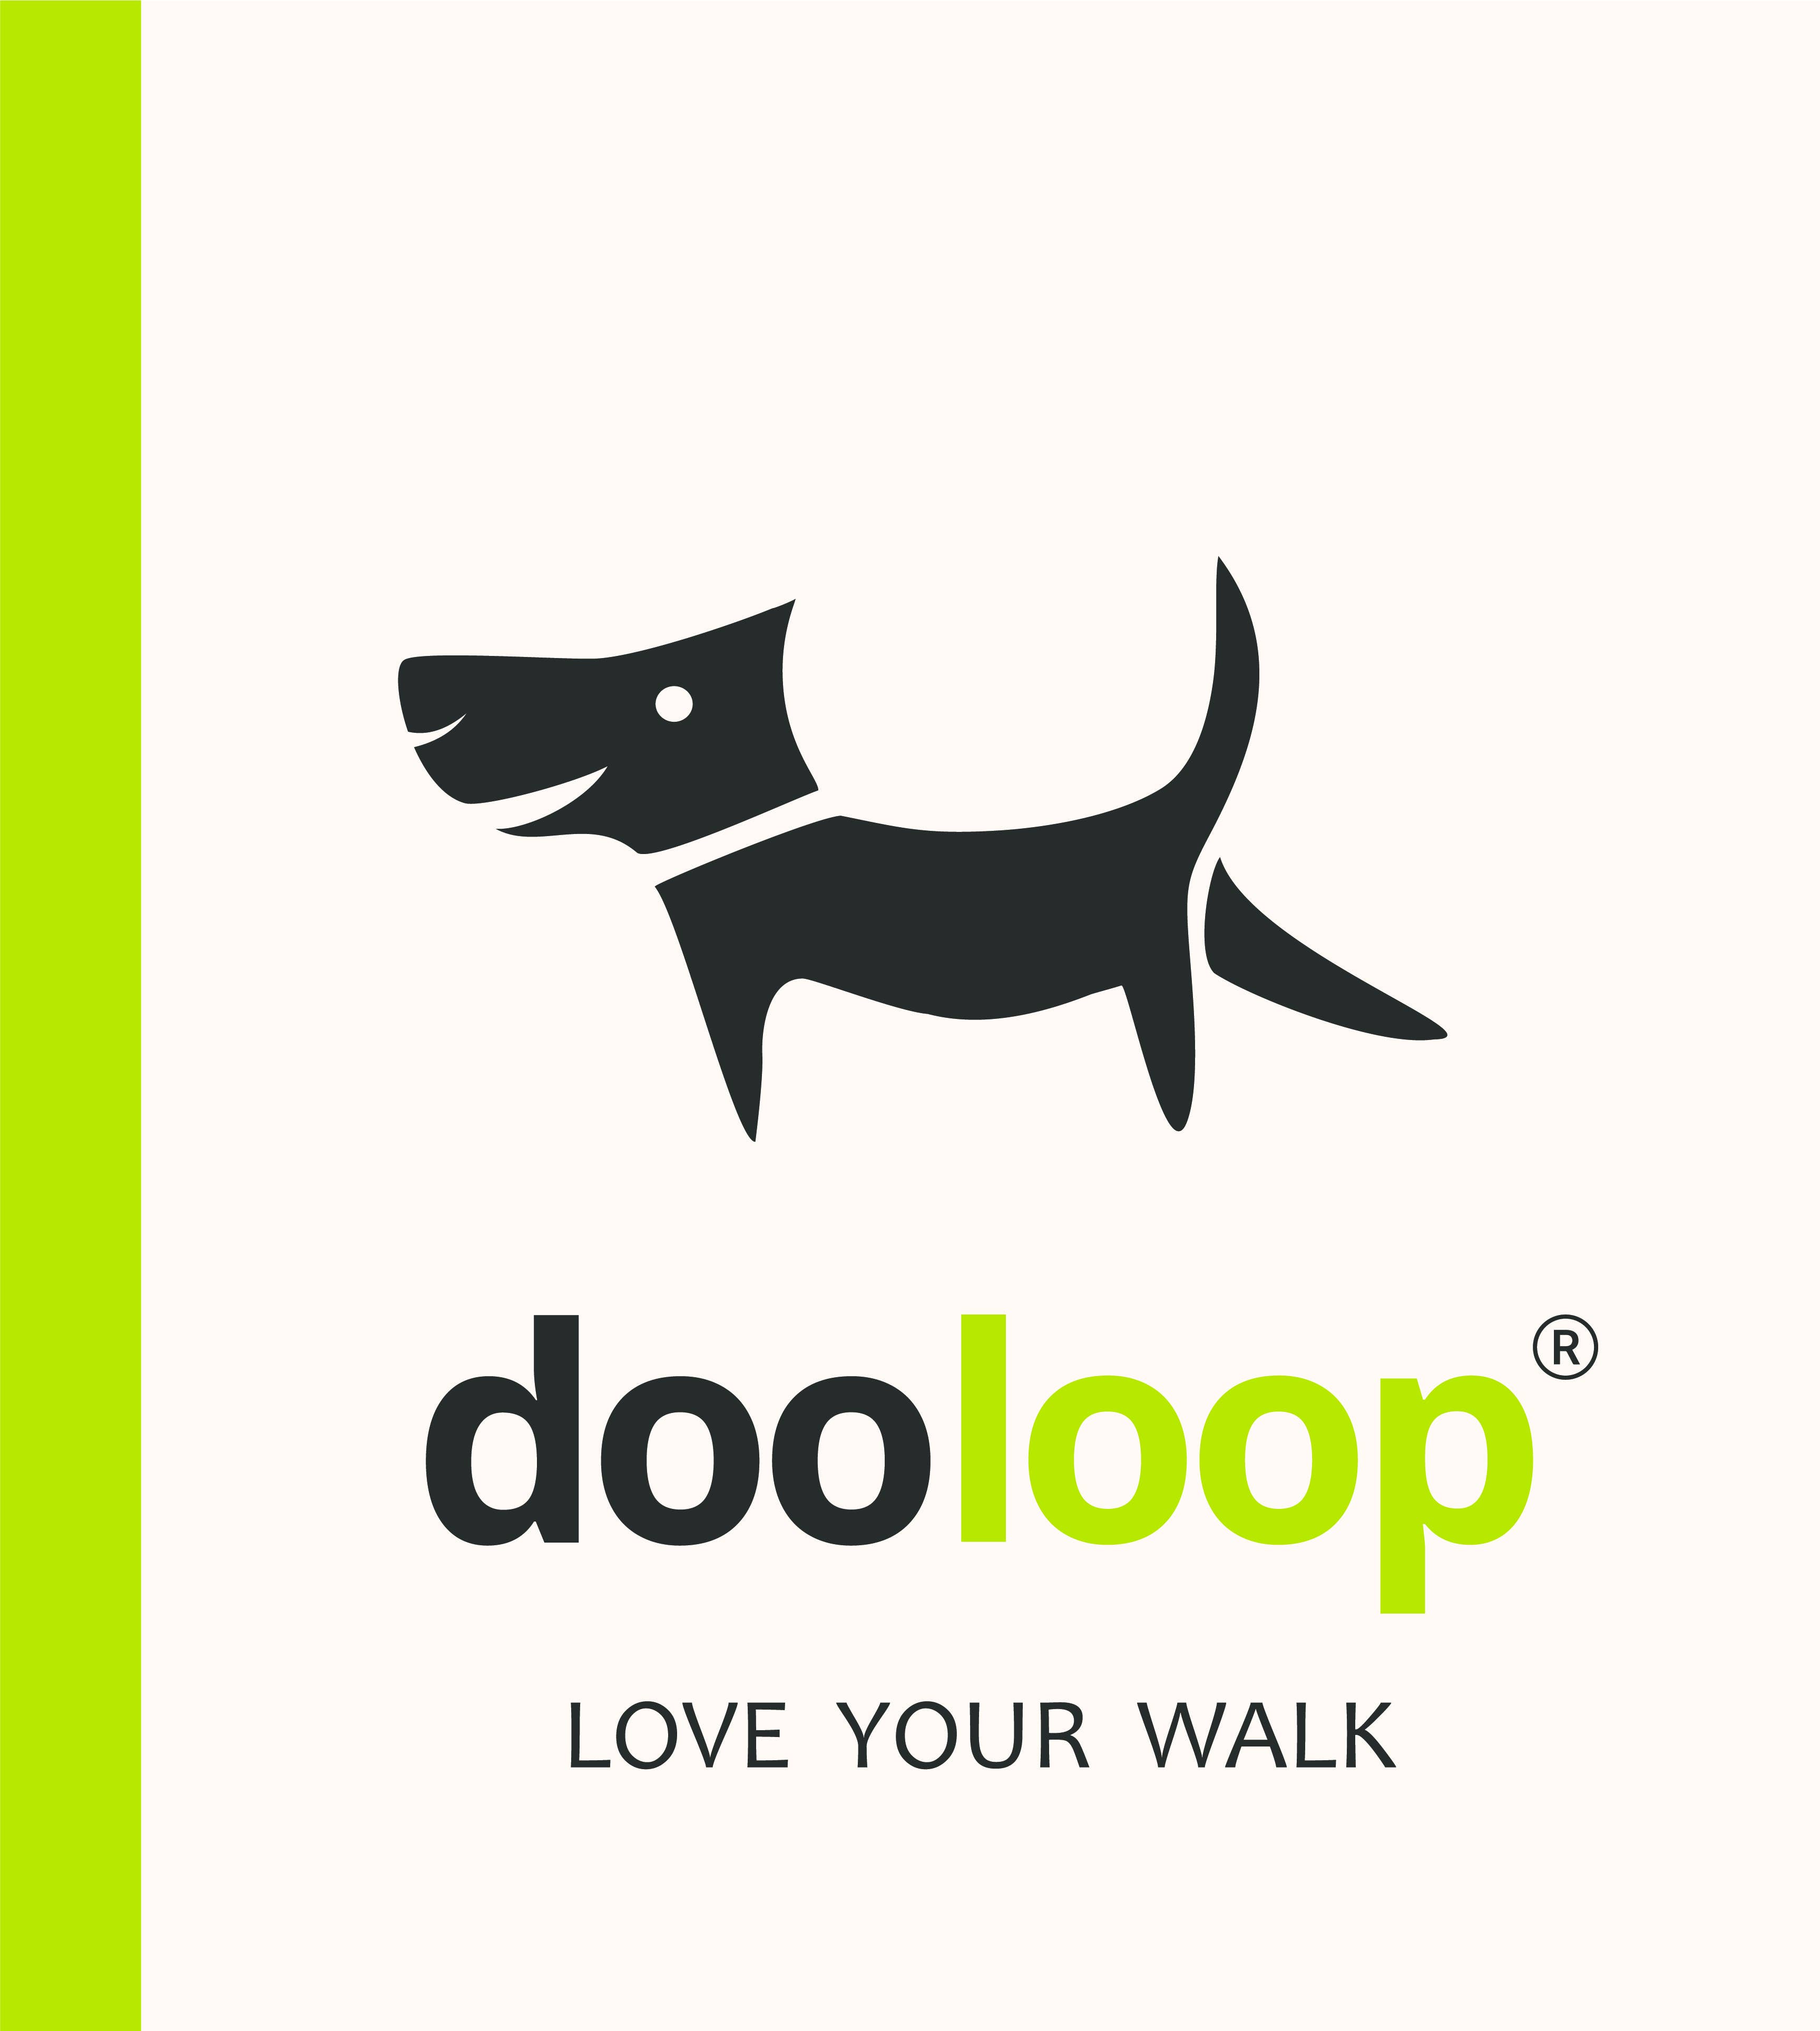 The dooloop by Houndswag LLC wholesale products